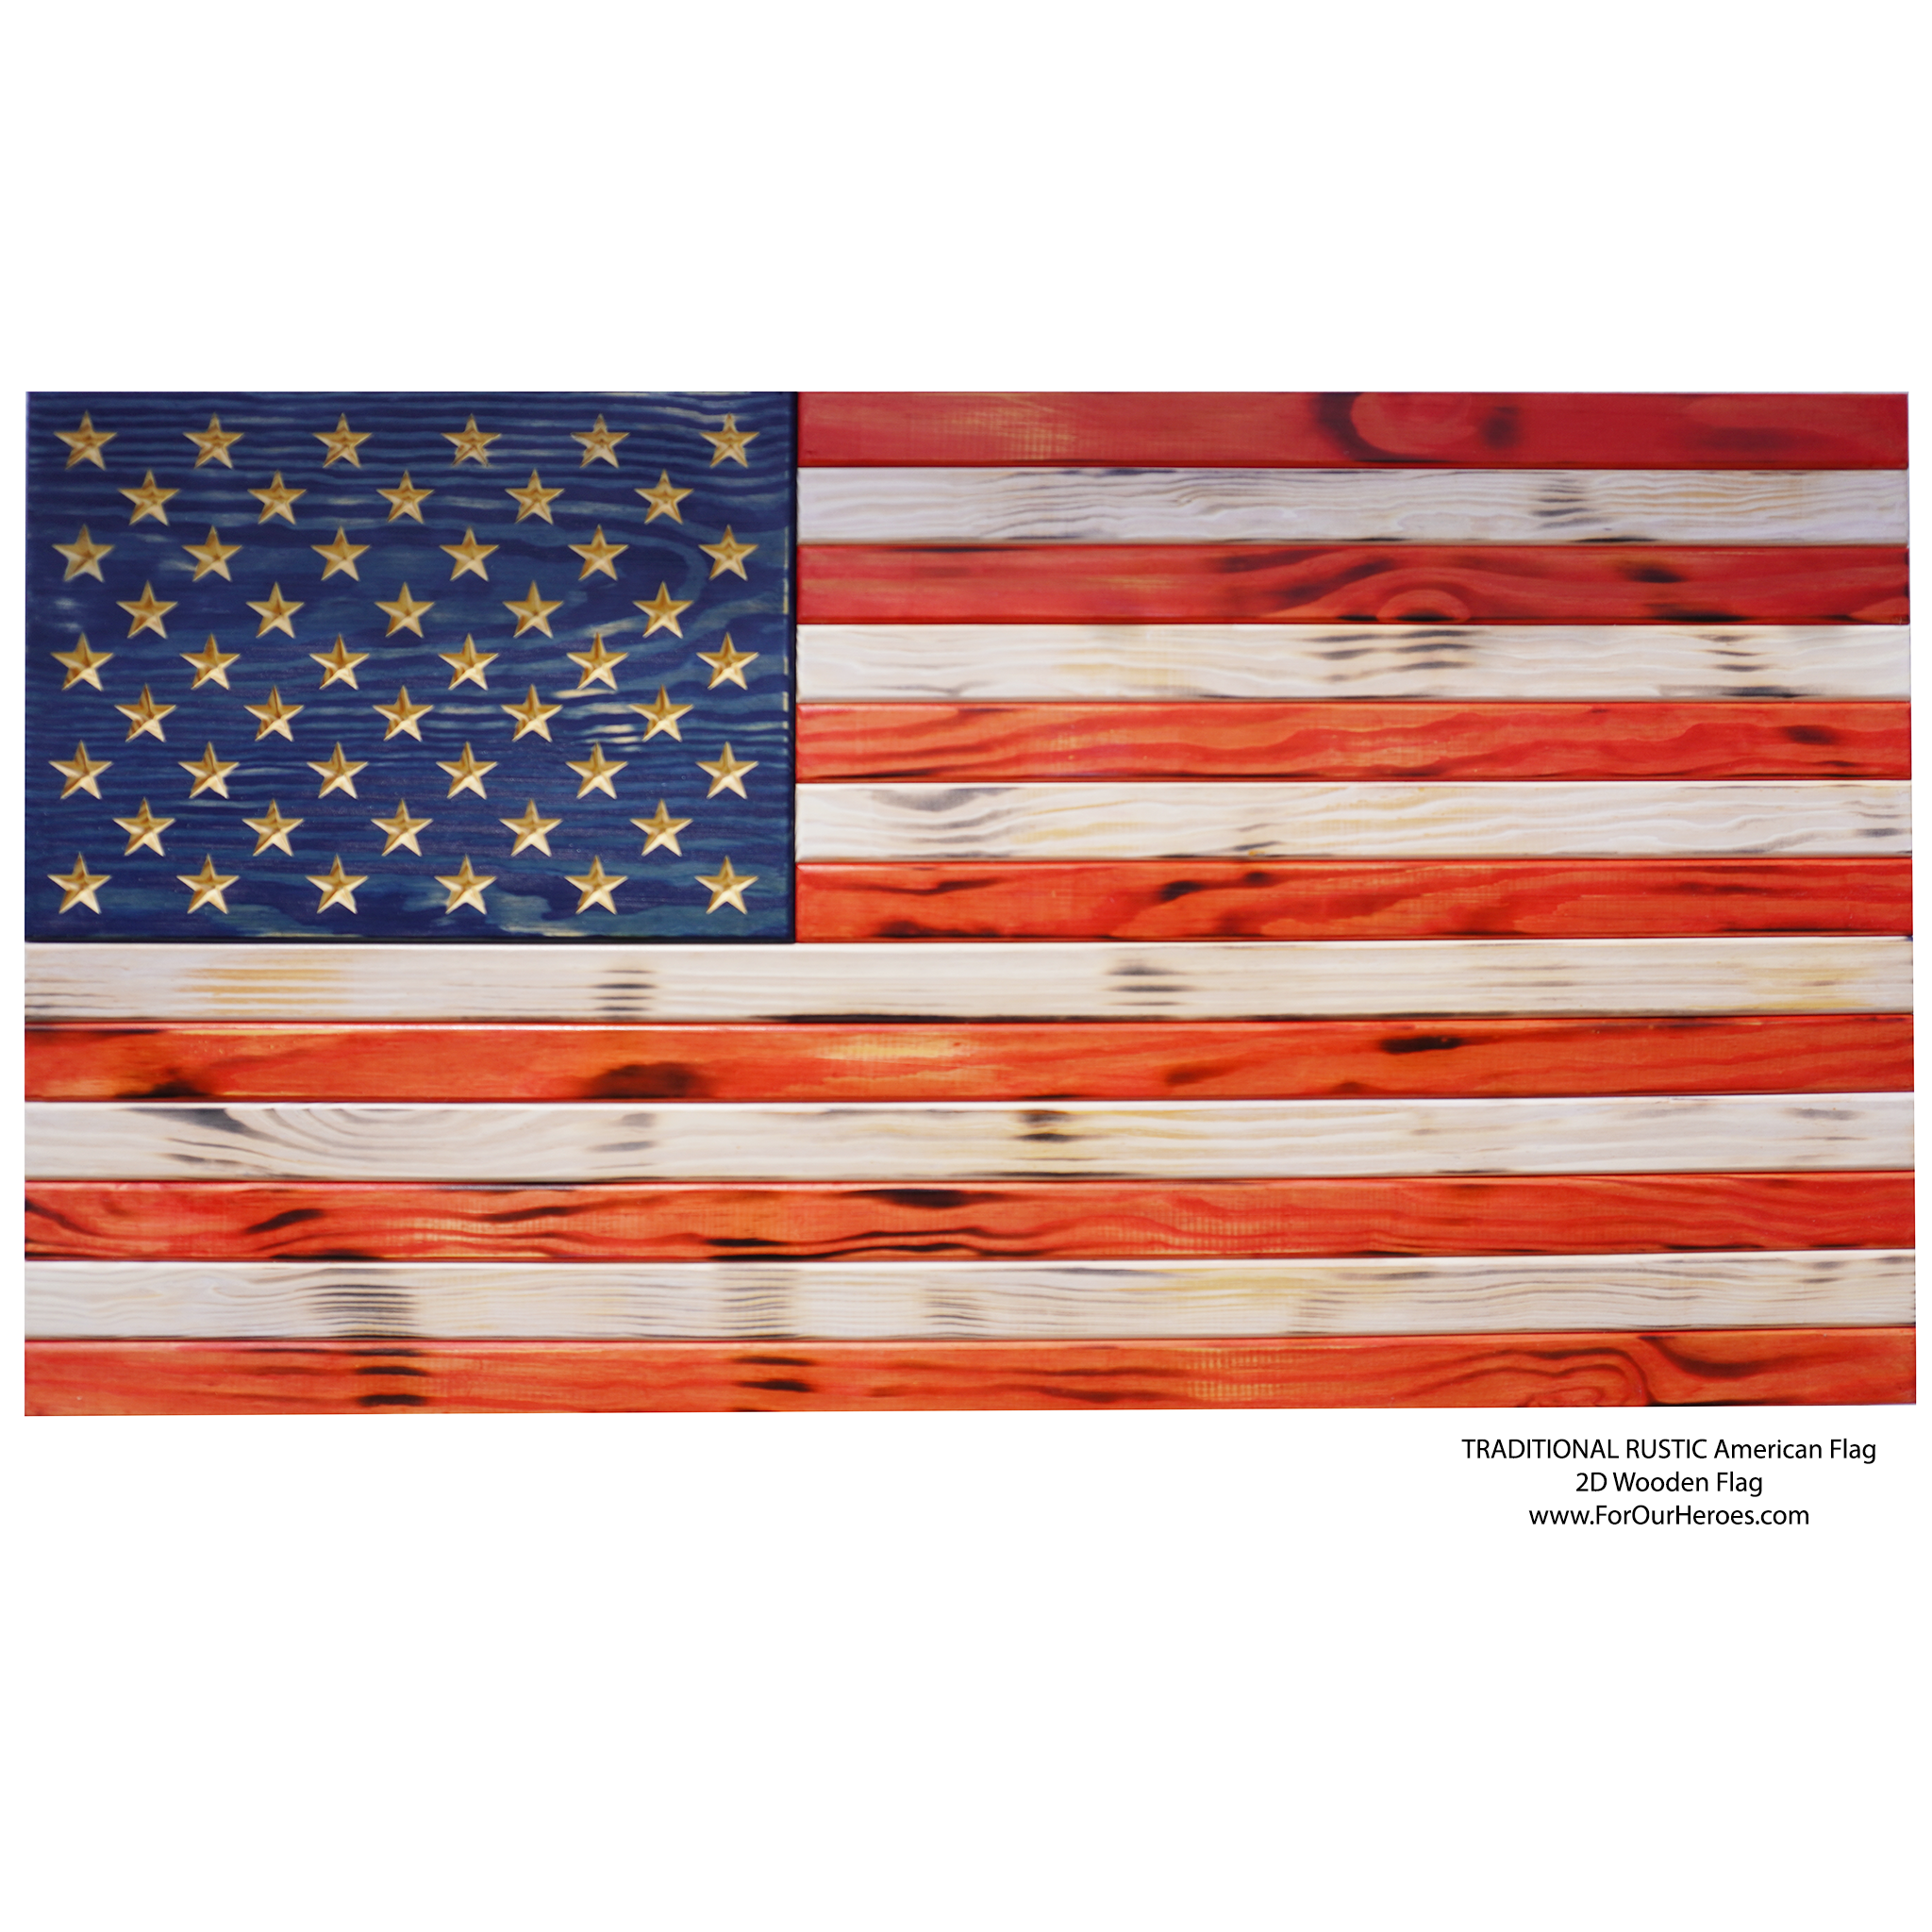 2D TRADITIONAL RUSTIC American Flag